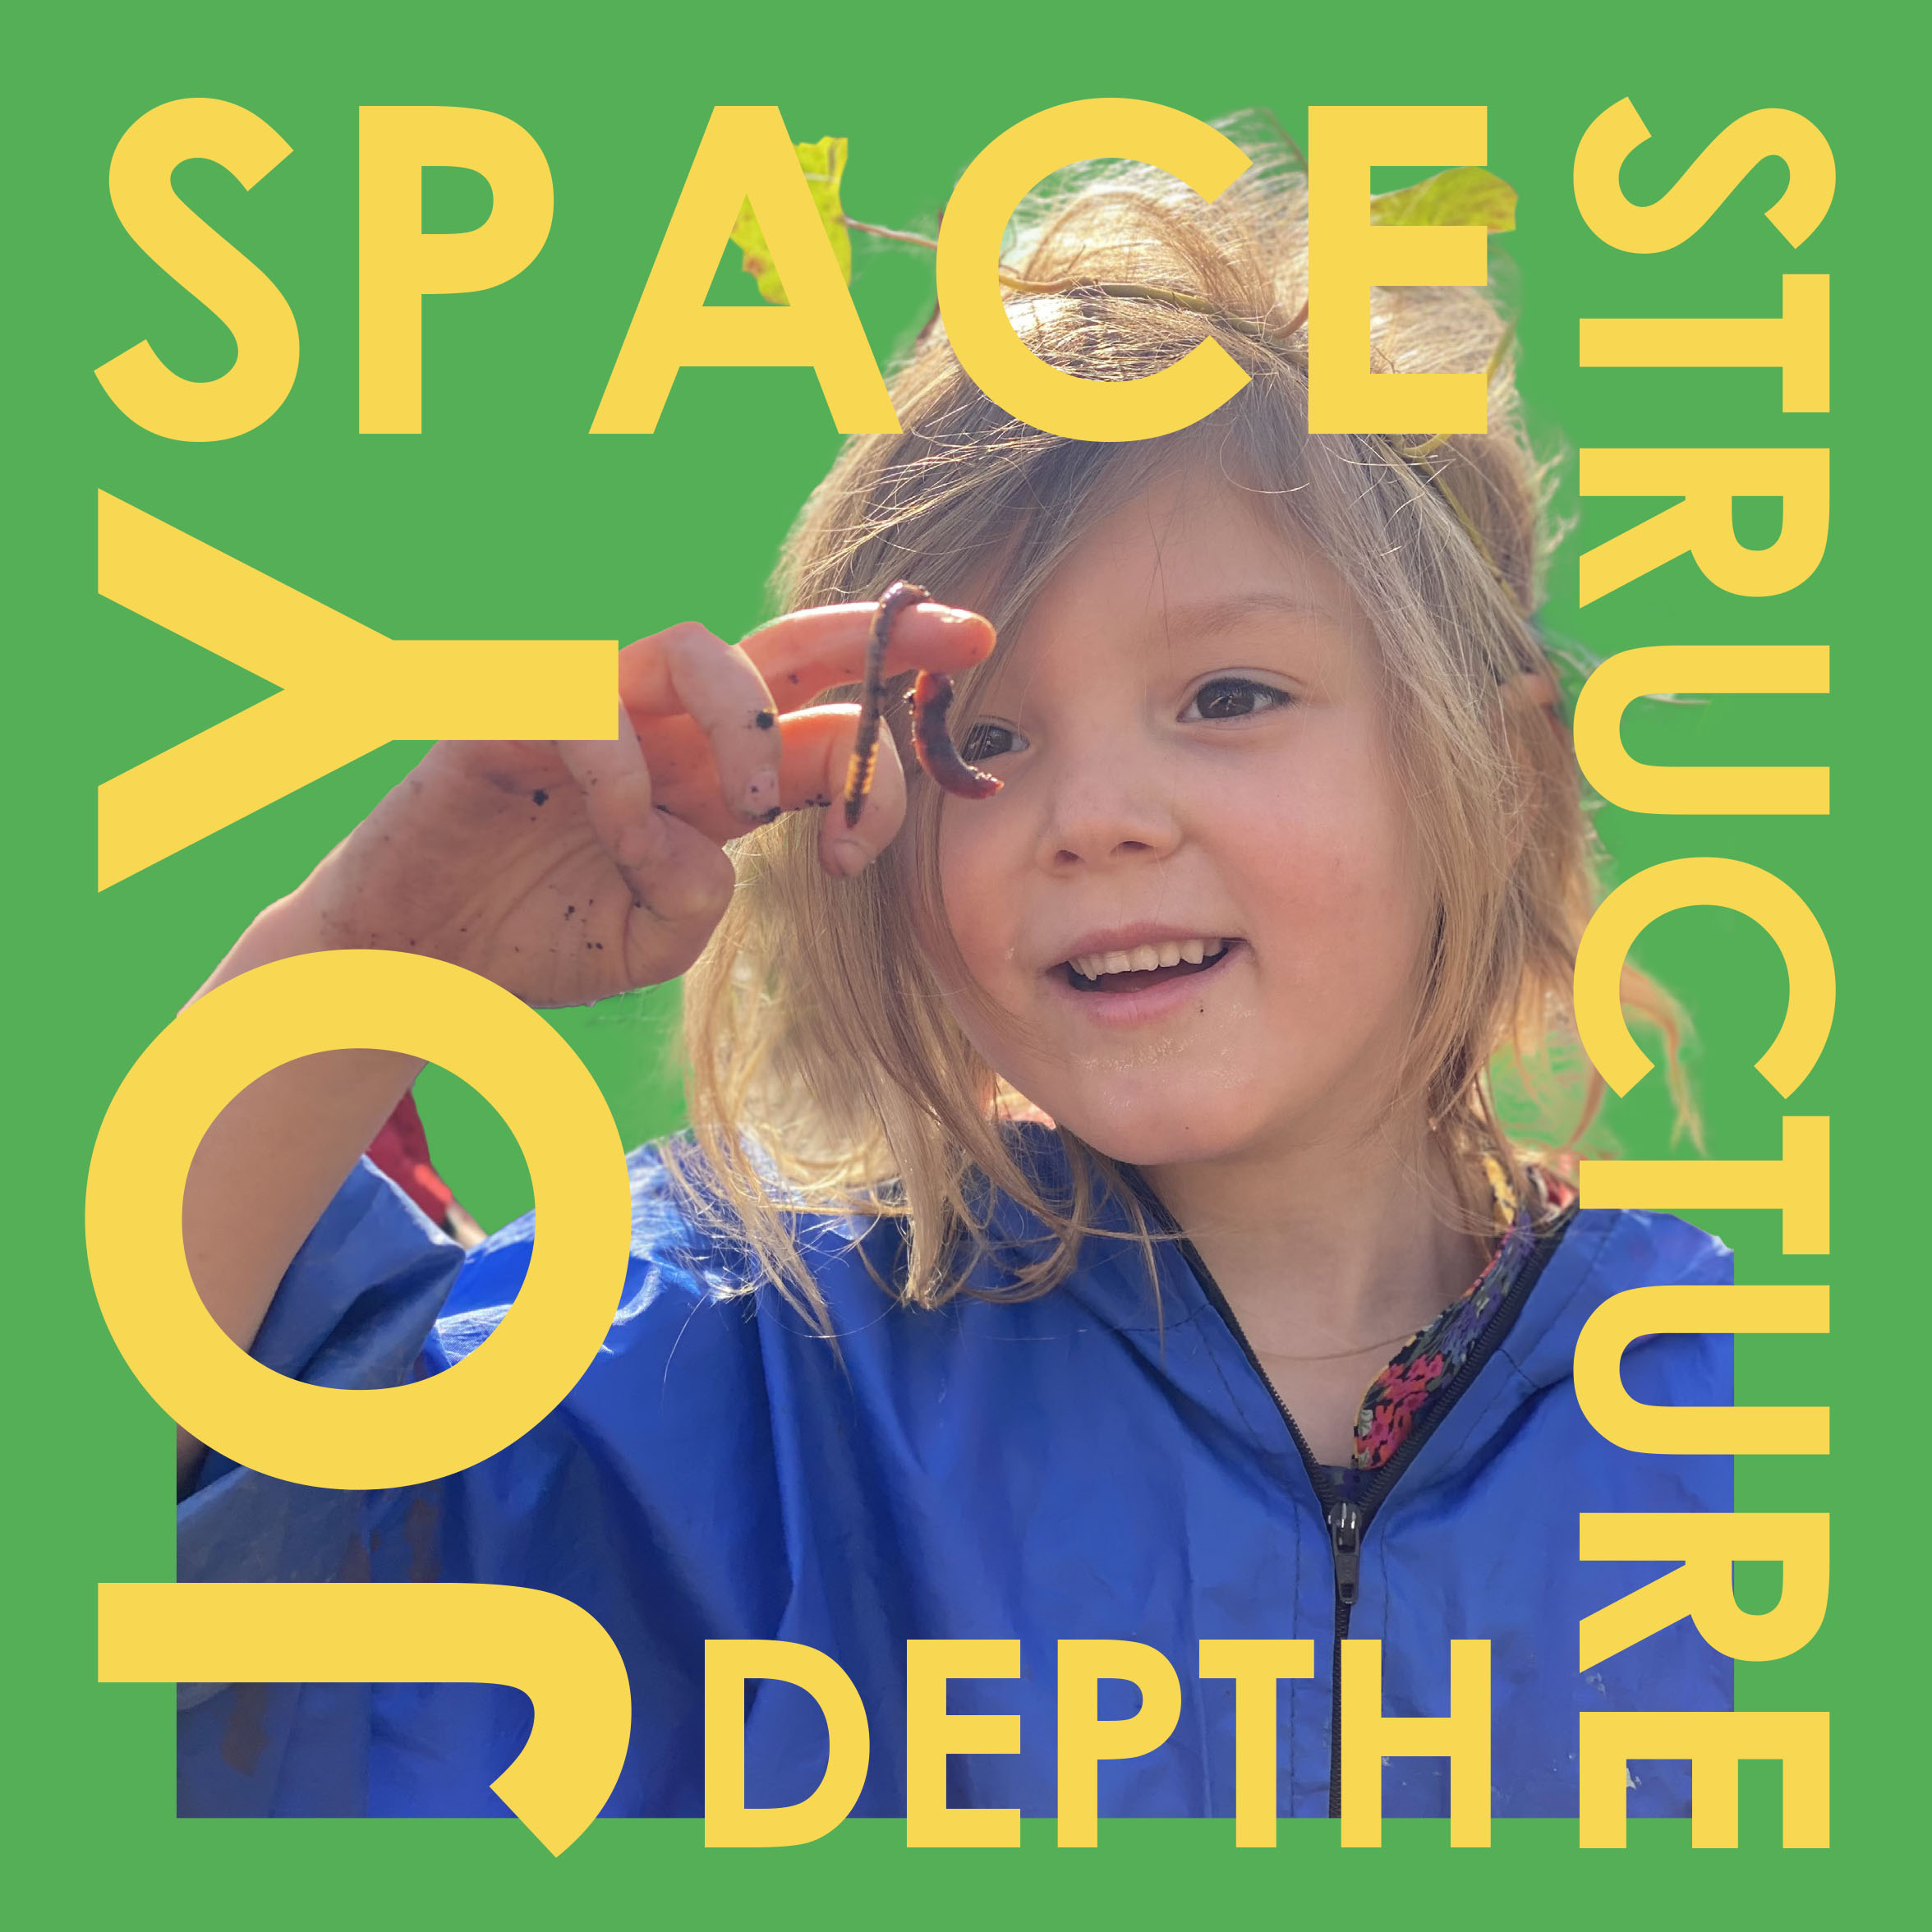 Student holding a worm and yellow text reading JOY SPACE STRUCTURE DEPTH